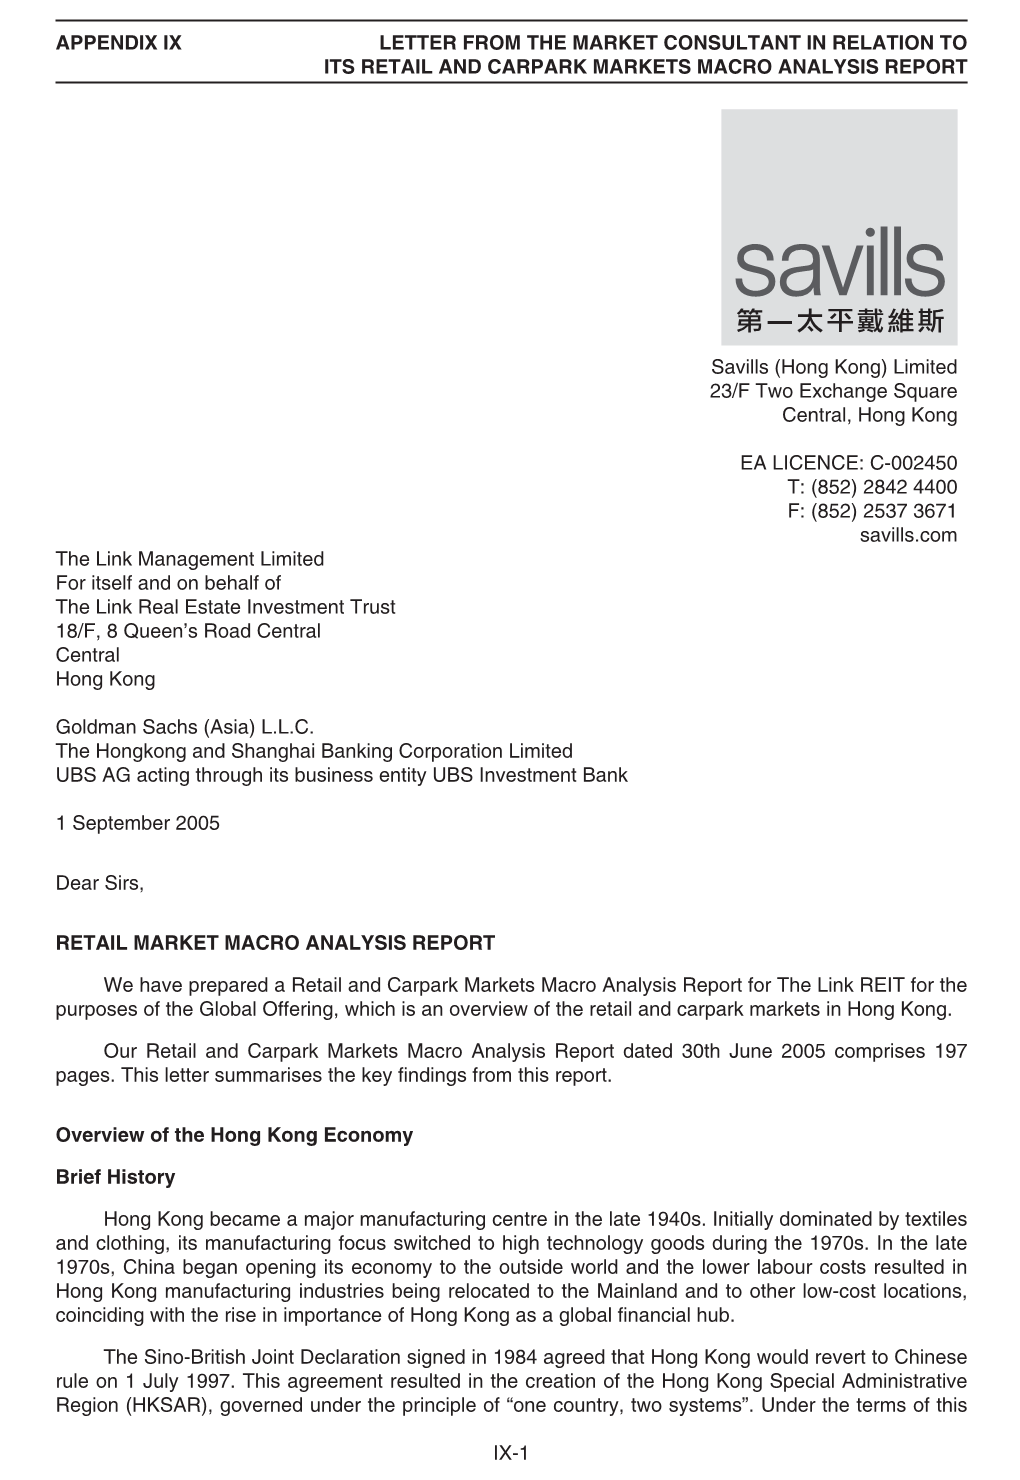 Appendix Ix Letter from the Market Consultant in Relation to Its Retail and Carpark Markets Macro Analysis Report